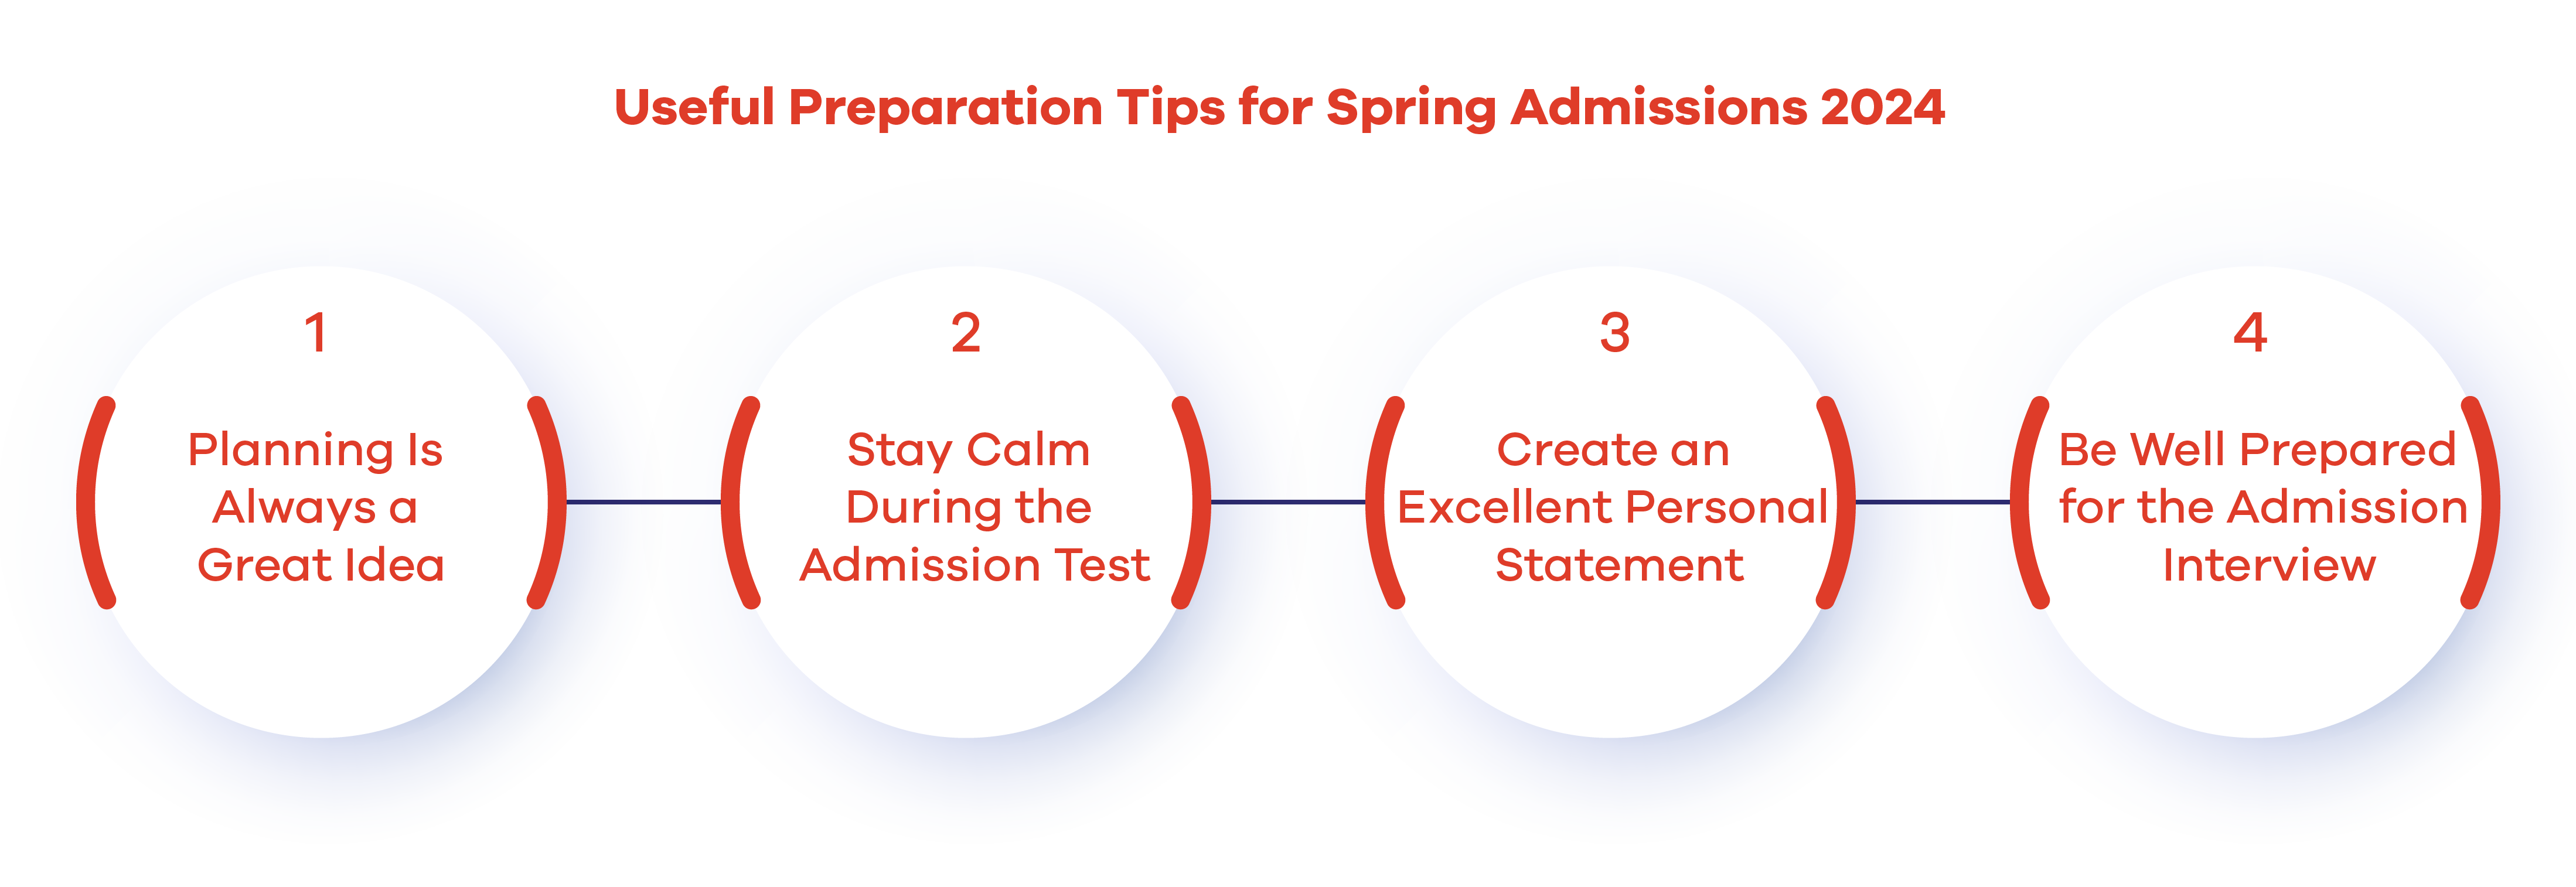 Useful Preparation Tips for Spring Admissions 2024